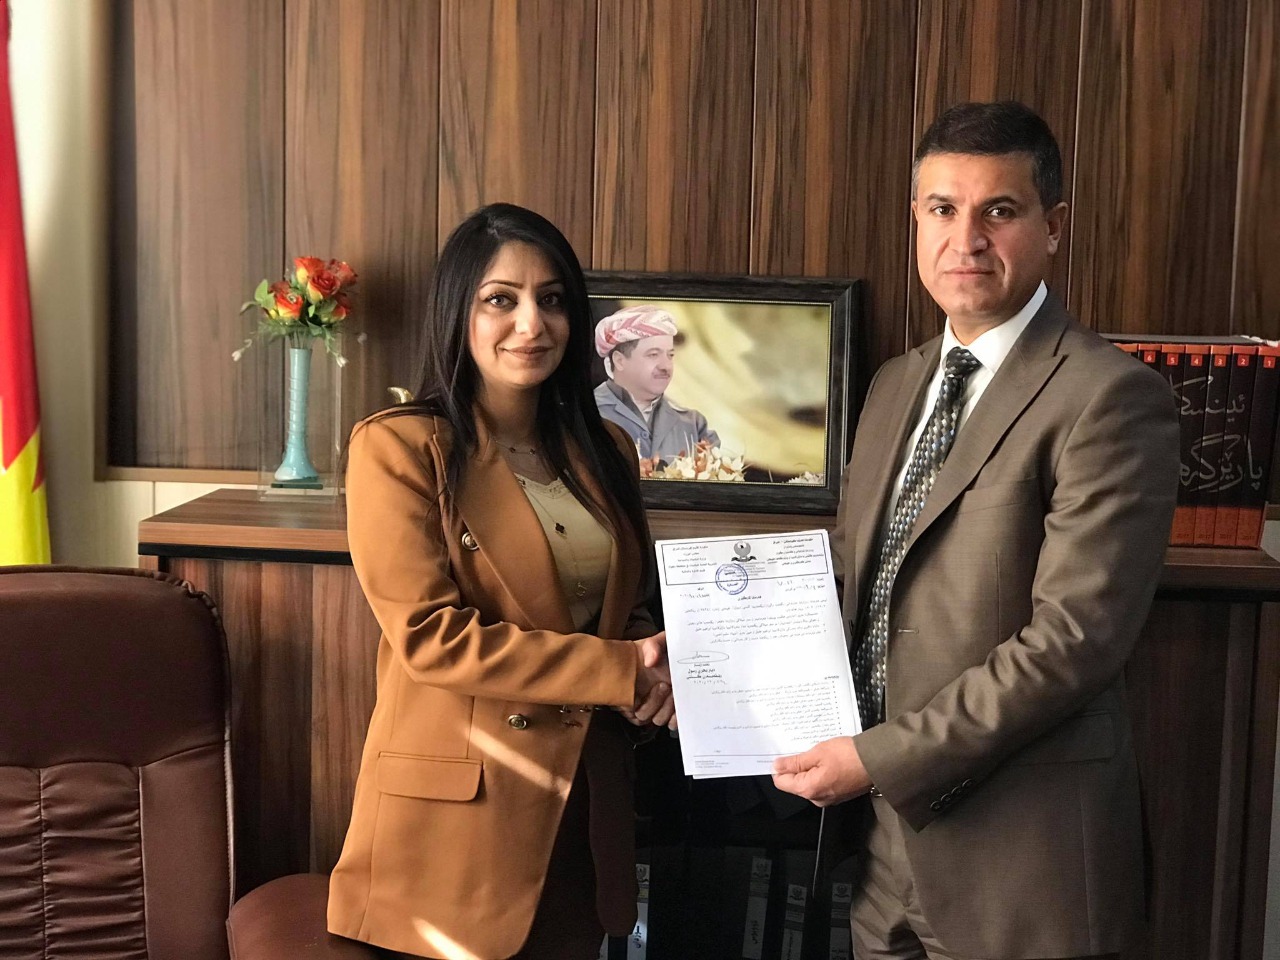 Duhok implements its pledge by appointing a woman as a director